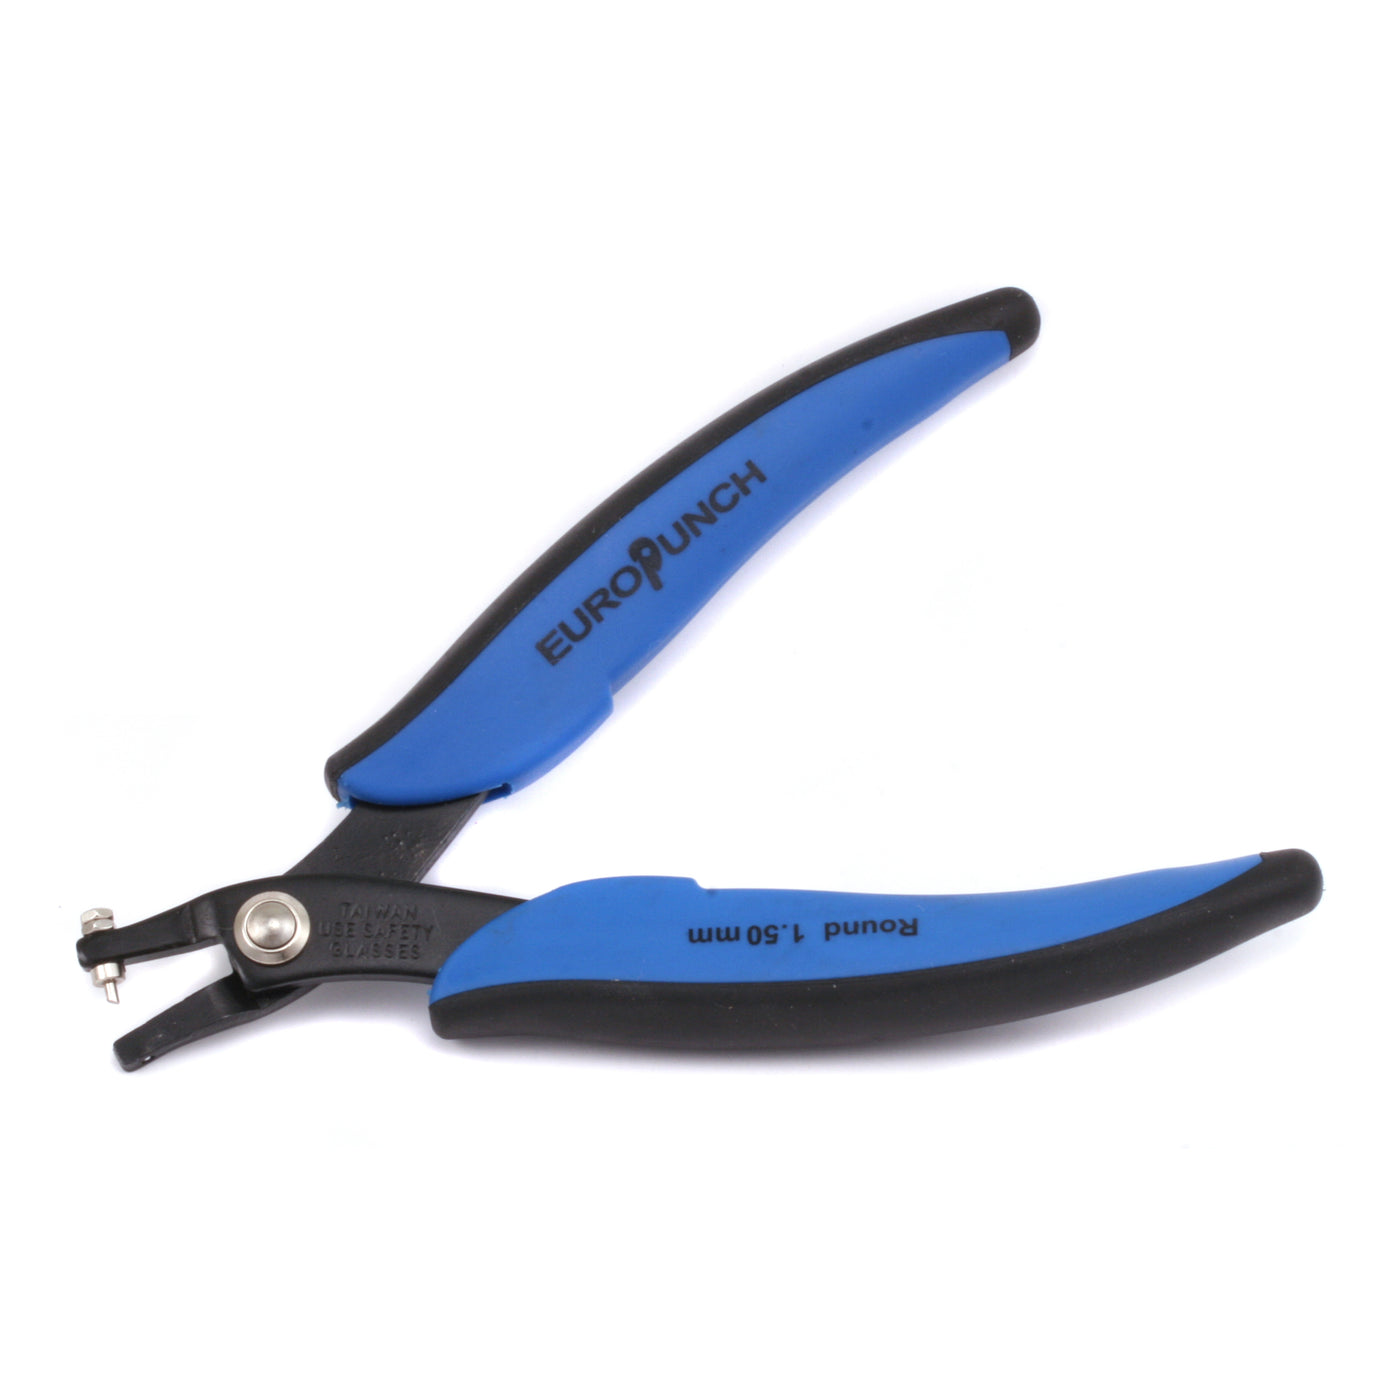 Metal Hole Punch Plier, 1.5mm hole – Beaducation